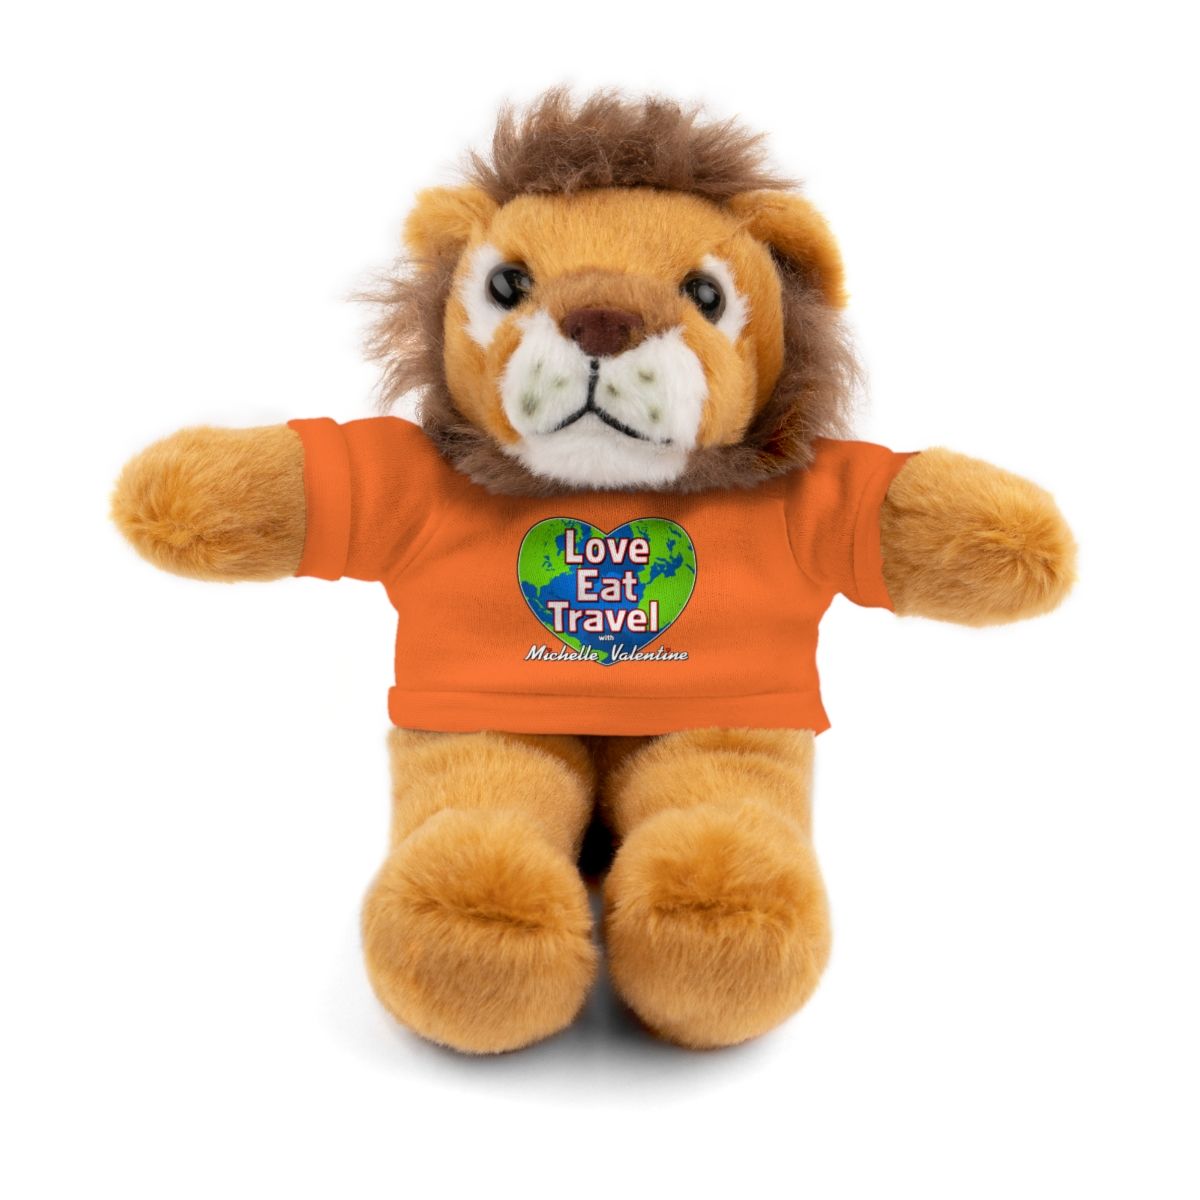 Looking for a gift for a young traveler? Cutest companion to accompany your loved one on their travels! Learn more: buff.ly/4biEmzi #loveeattravel #michellevalentine #plushie #lion #stuffedanimal #lionplushie #travelbuddy #cute #gift #toys #travel #love #traveltips